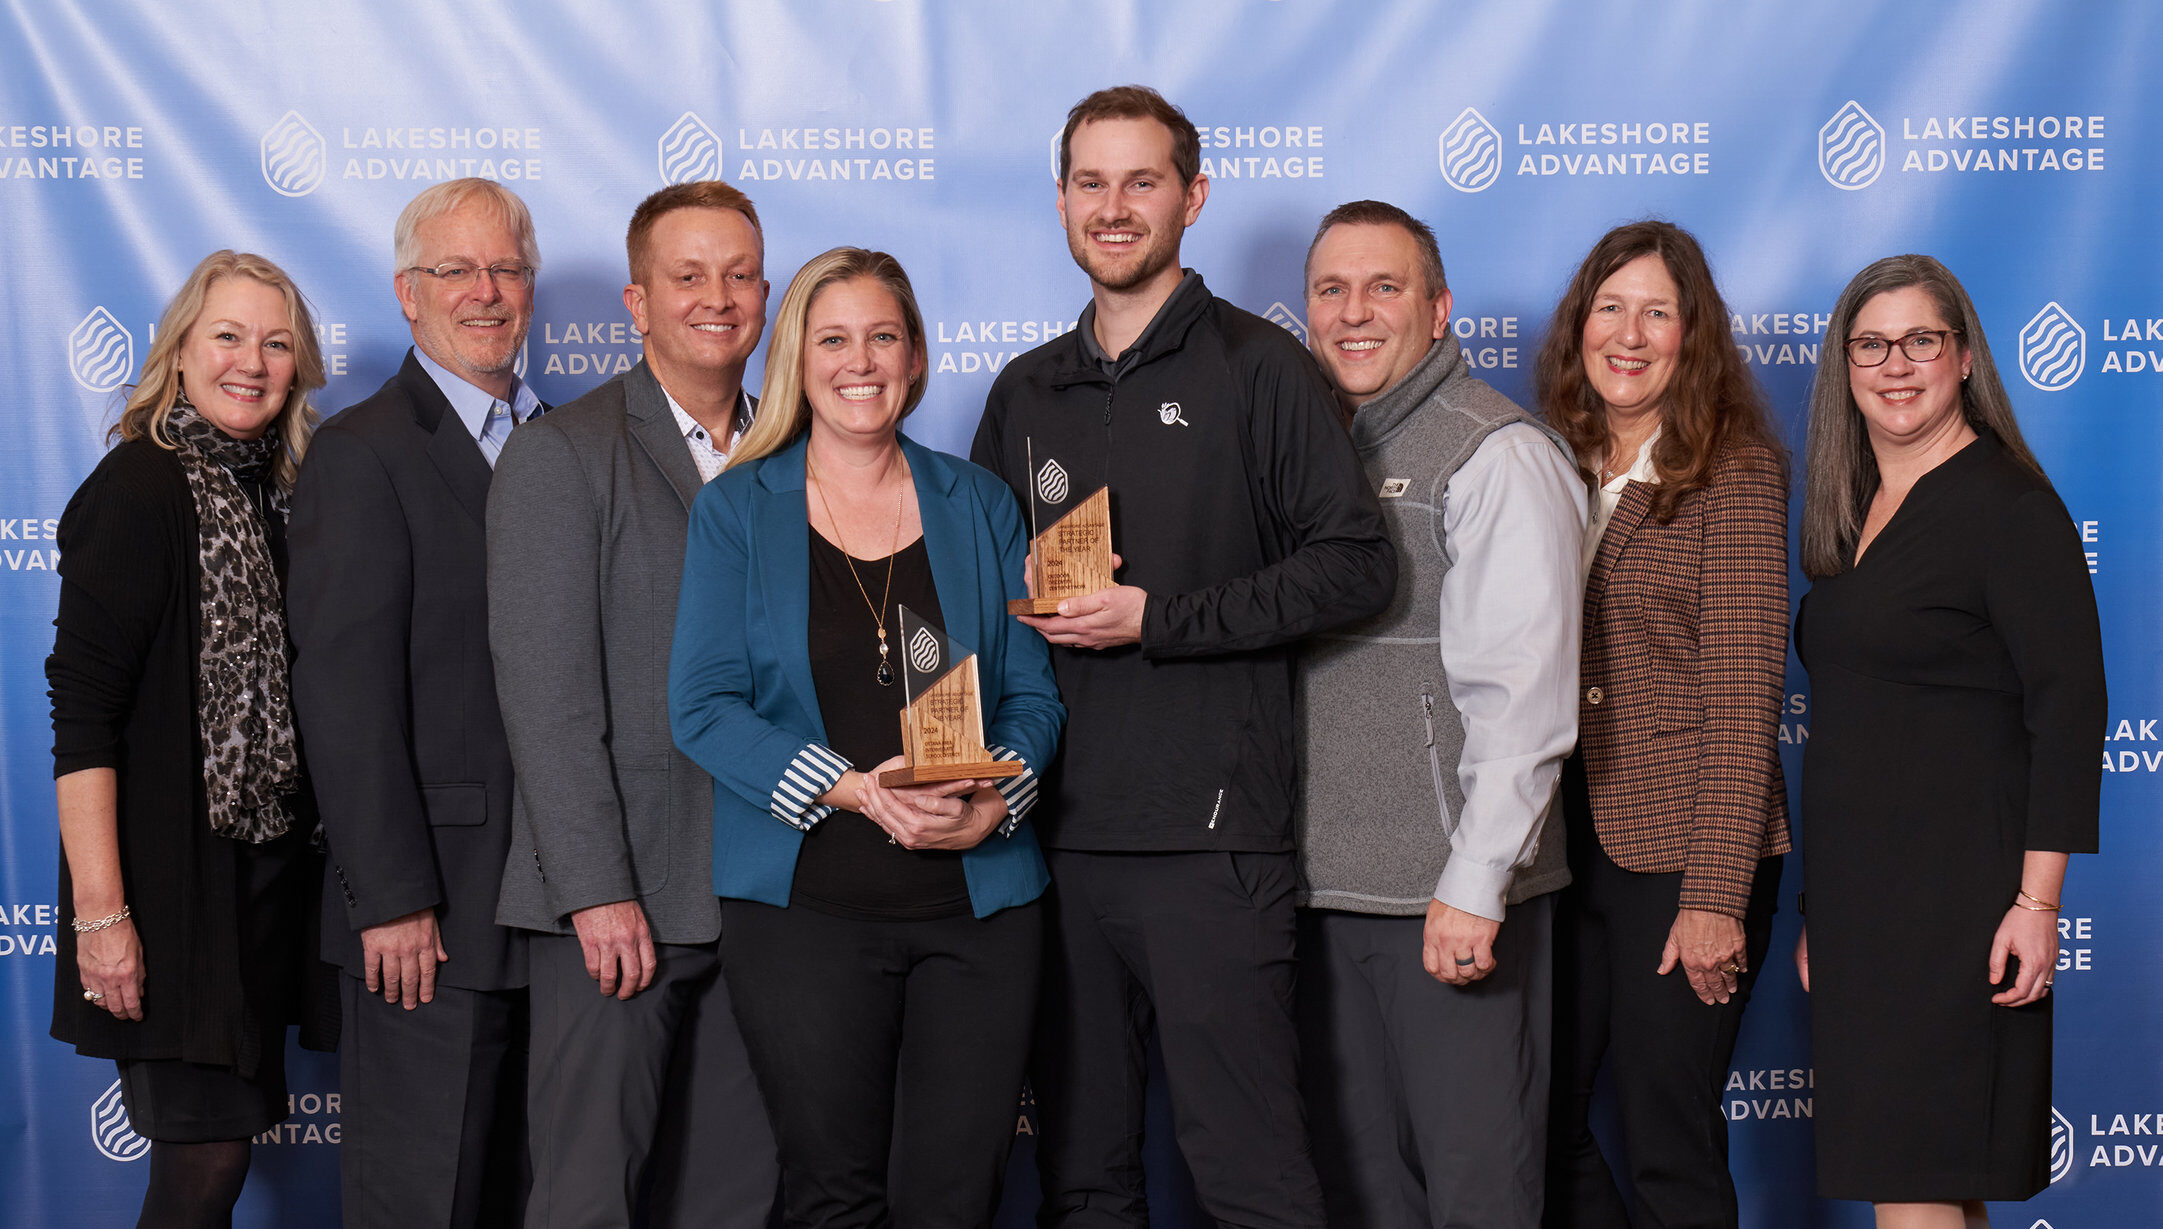 Ottawa Area Intermediate School District and Outdoor Discovery Center Network Receive Lakeshore Advantage Strategic Partner of the Year Award blog image 